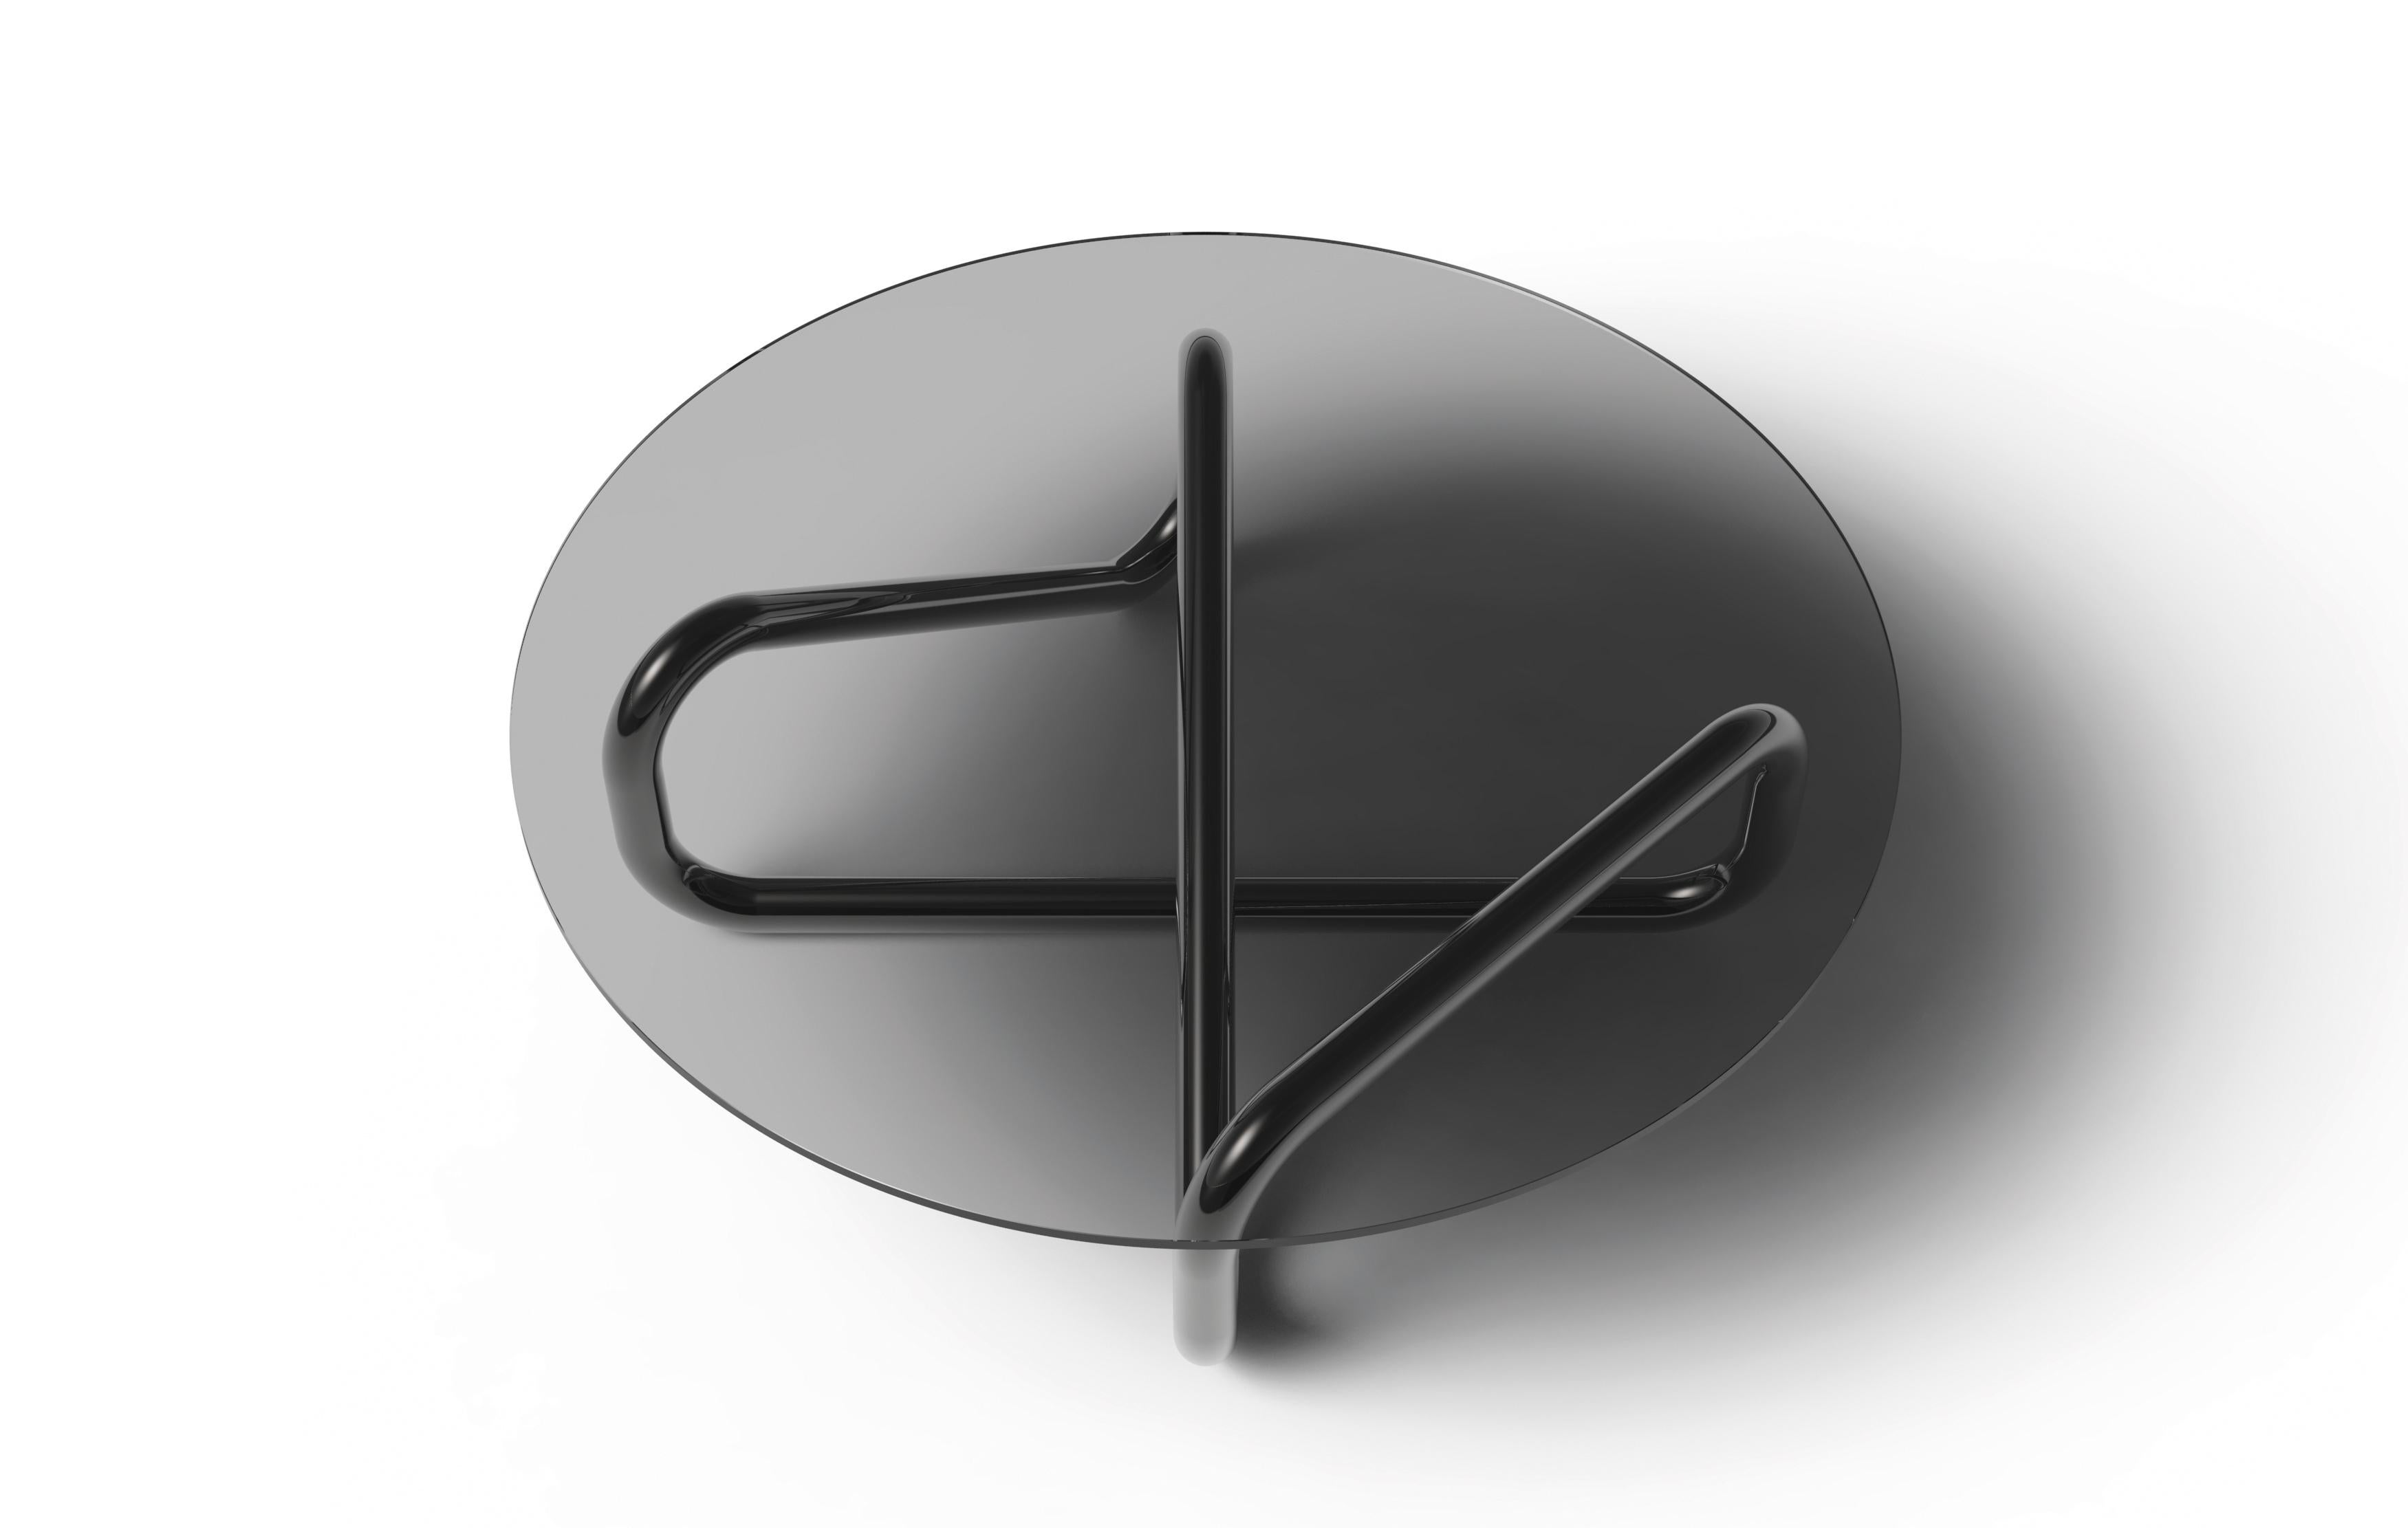 Arflex Infinity Small Table in Fume Glass by Claesson Koivisto Rune. The mathematical symbol of eternity is a figure that resembles a horizontal figure 8. The analogy is of course that if you follow the line it will take you eternity to arrive at